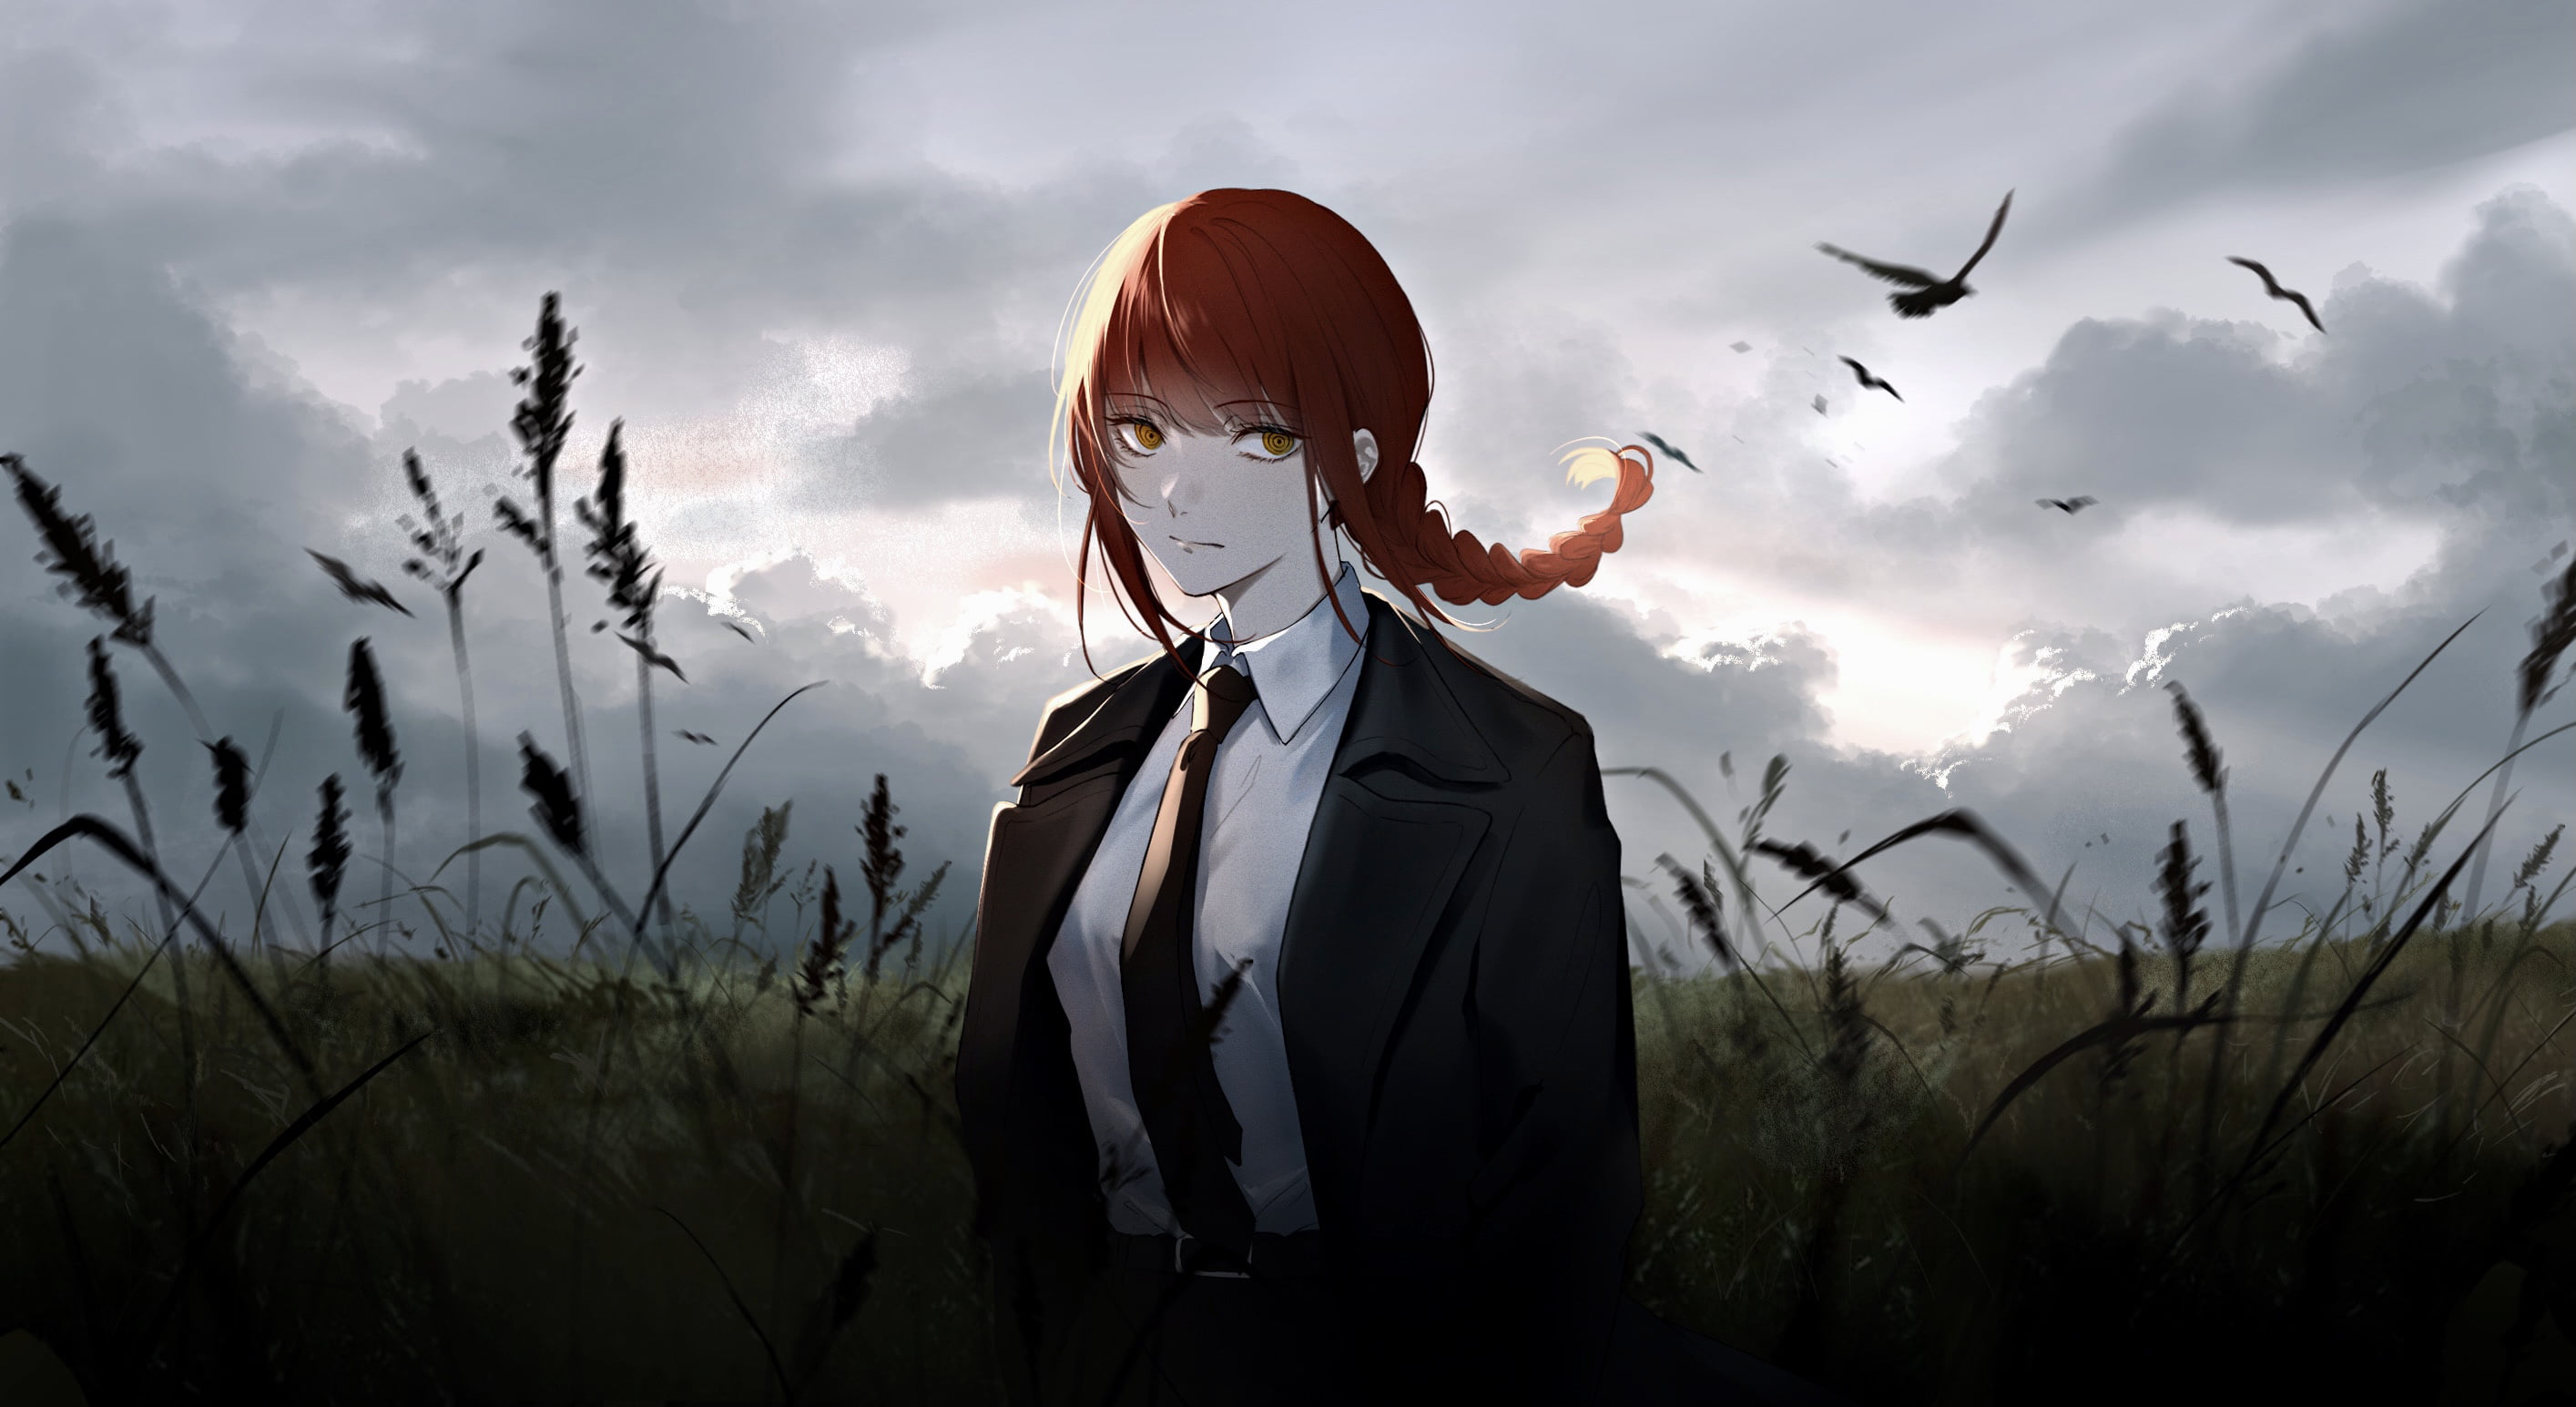 Makima (Chainsaw Man), birds, grass, suits, redhead, cloudy weather